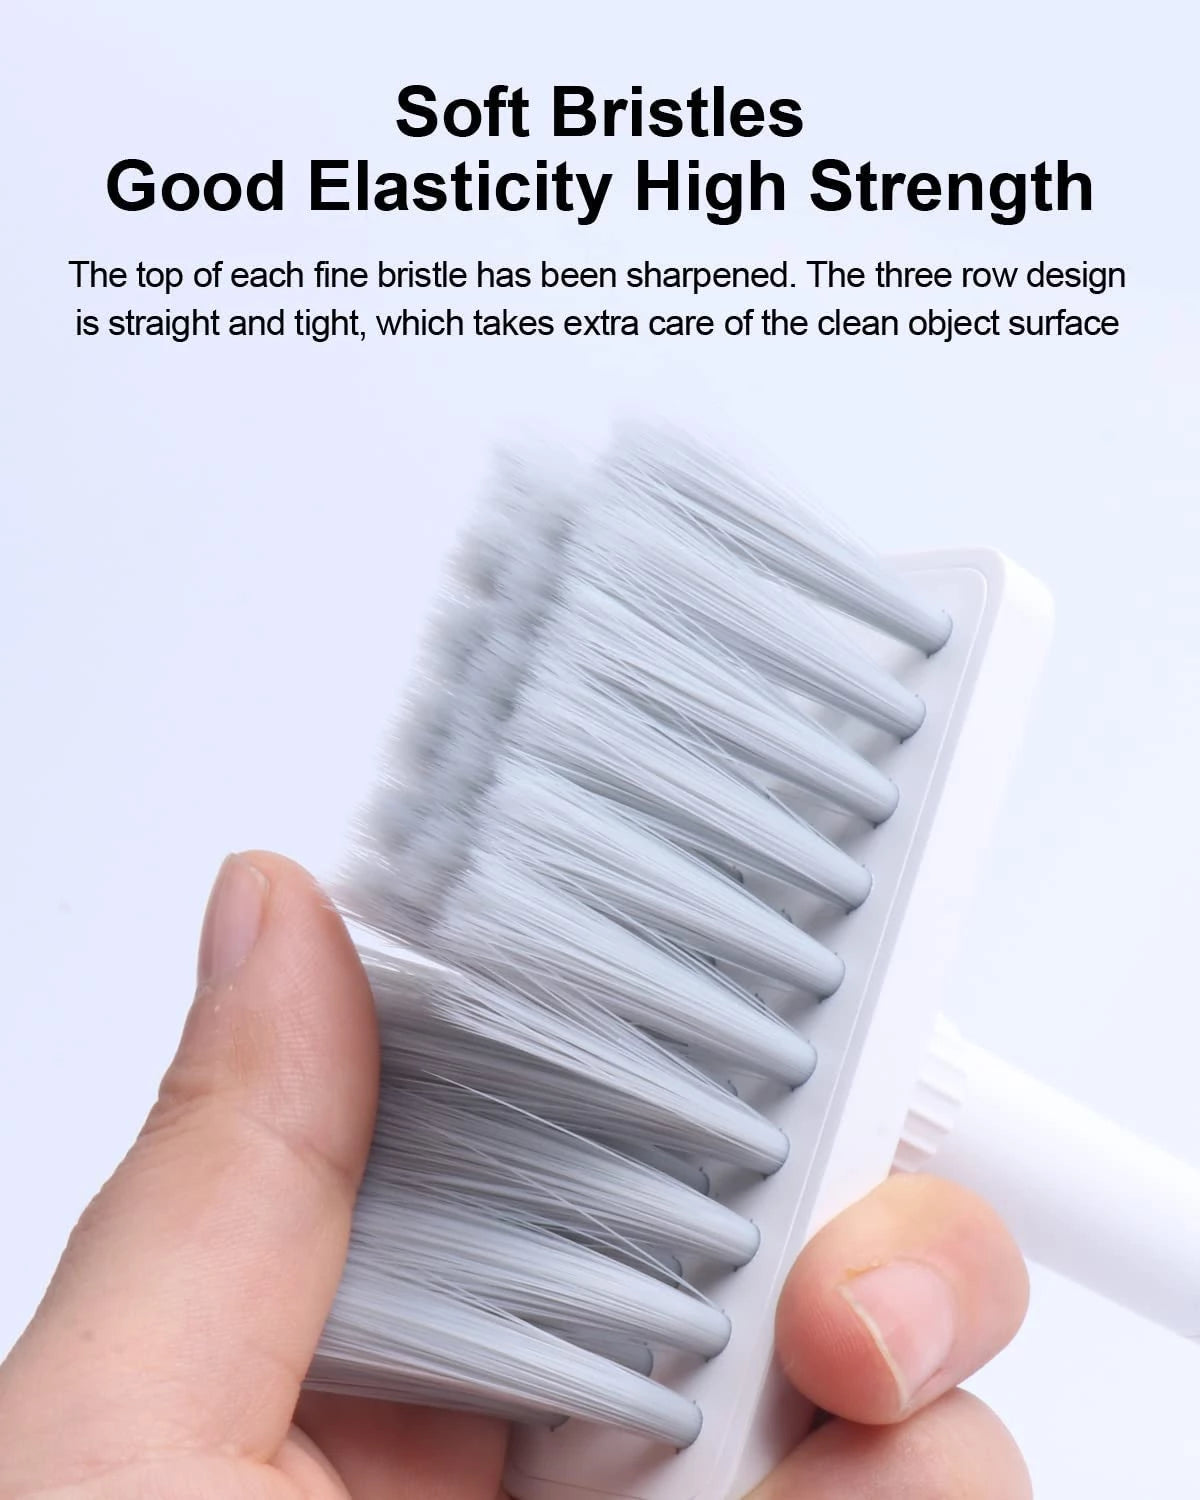 Epic Cleaning Brush (5 in 1)